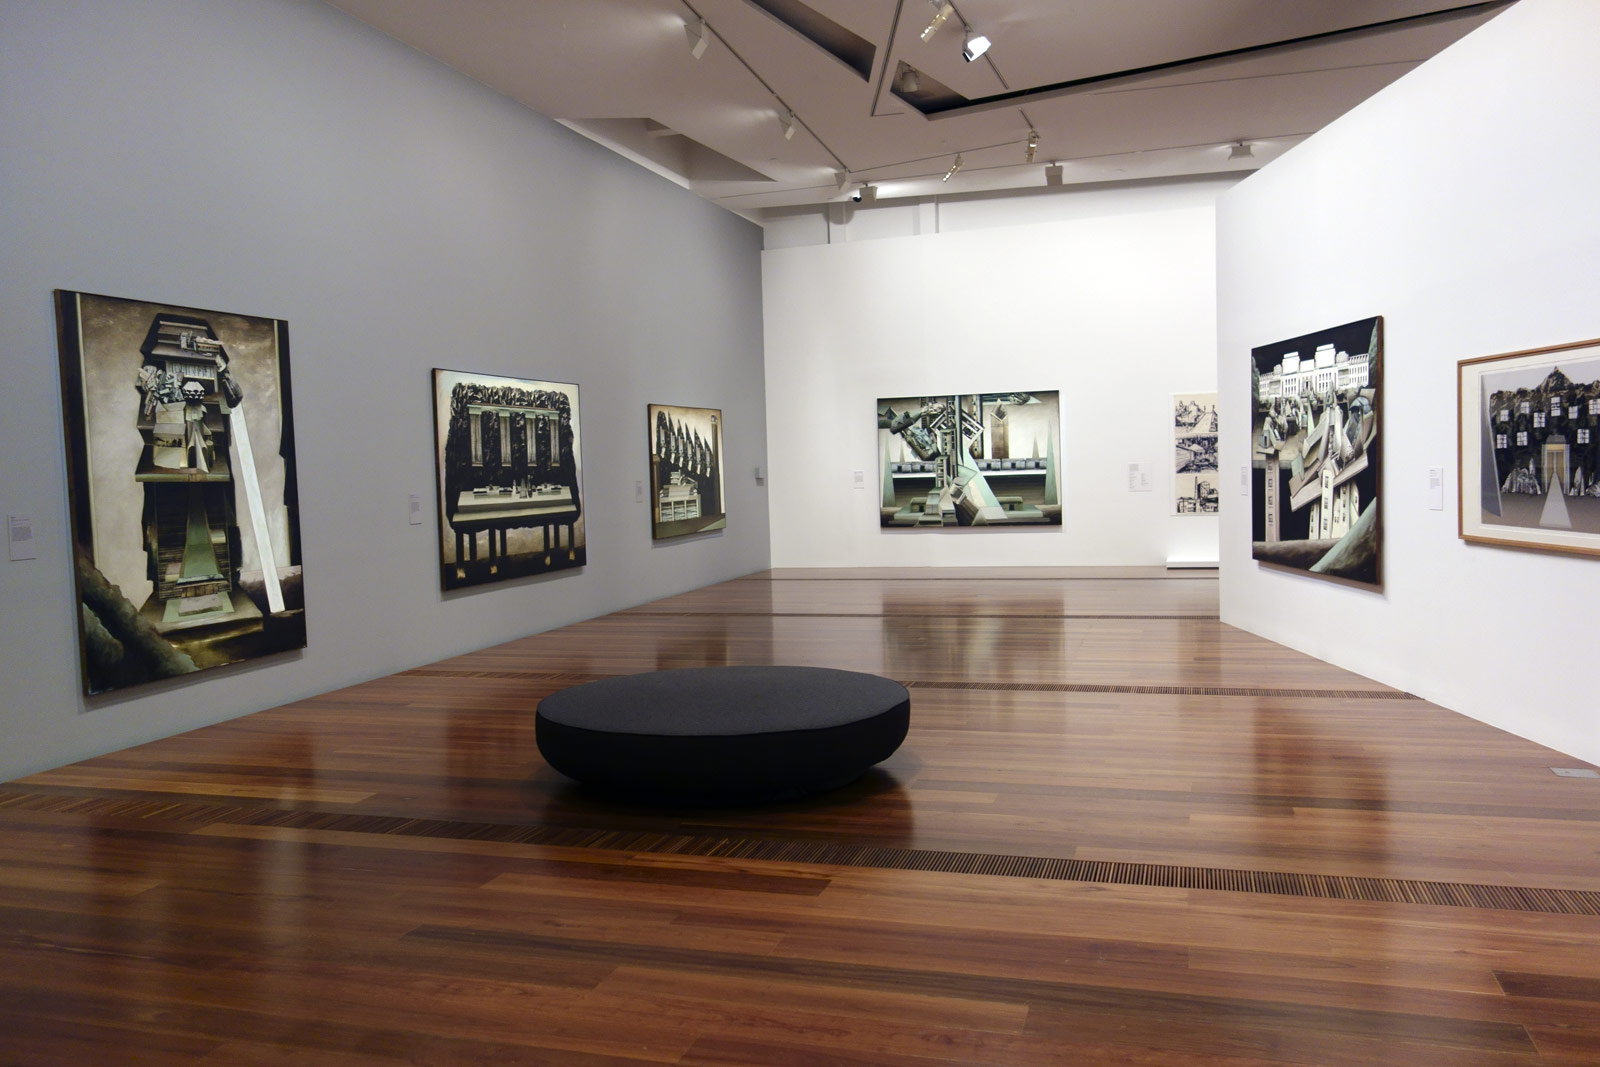 Installation view of the exhibition 'Jan Senbergs: Observation - Imagination' at The Ian Potter Centre: NGV Australia